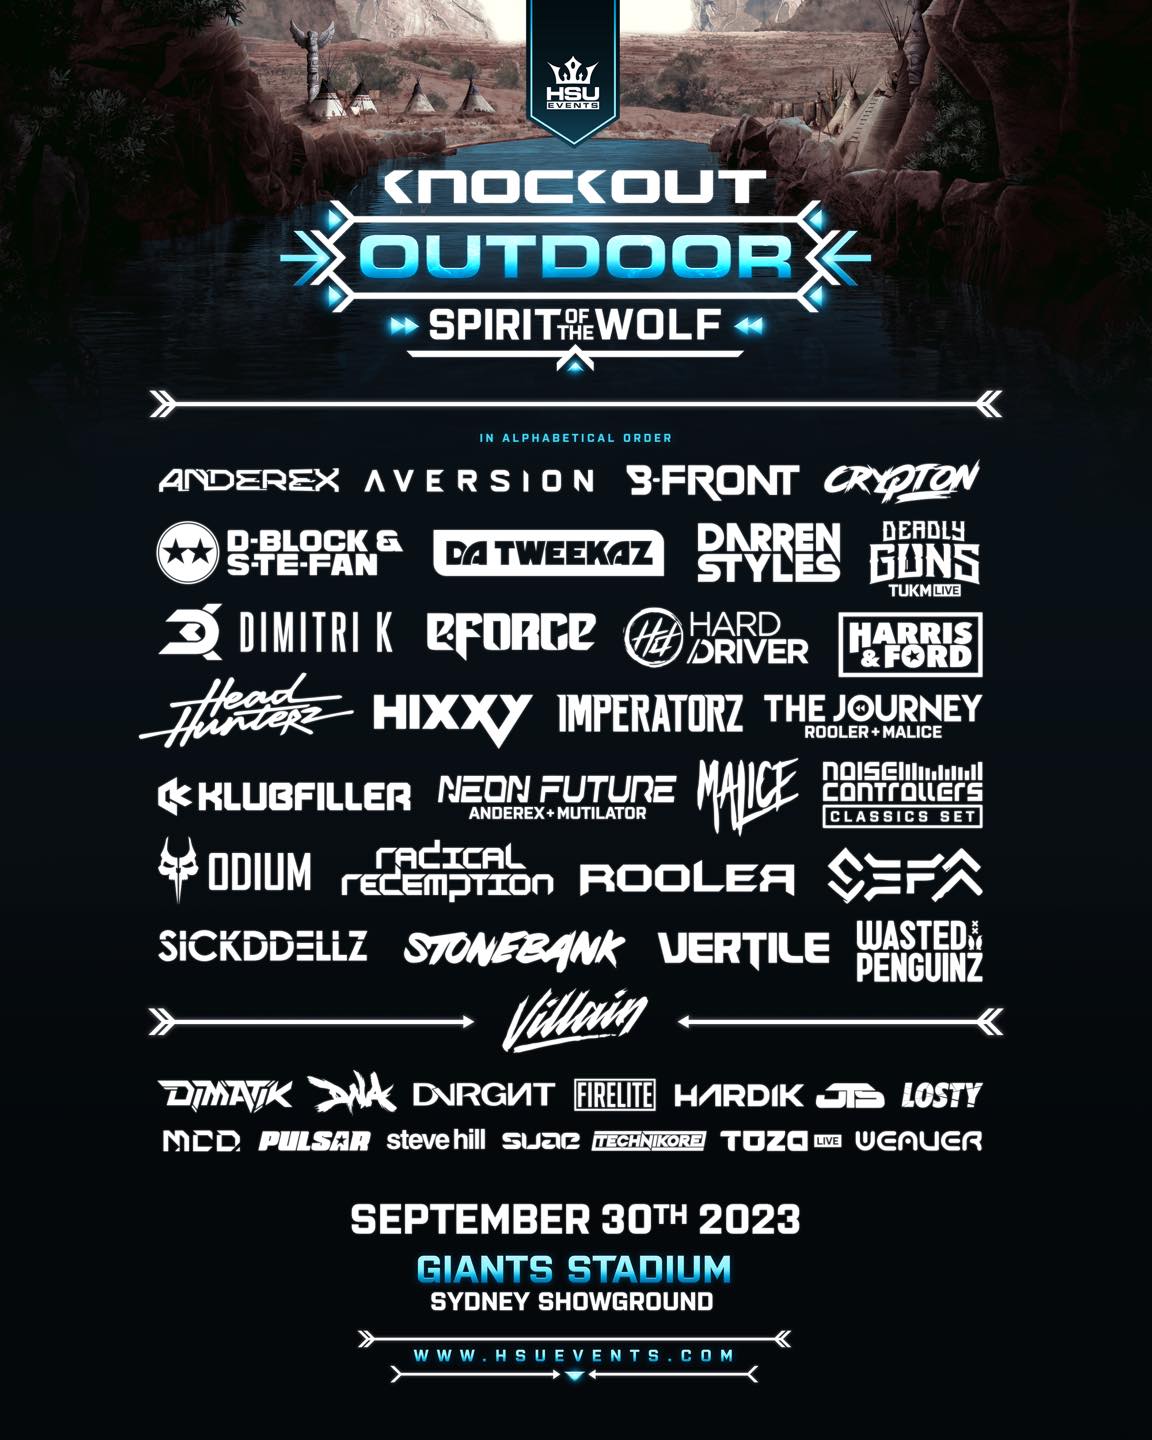 knockout-outdoor-2023-spirit-of-the-wolf-poster-oz-edm